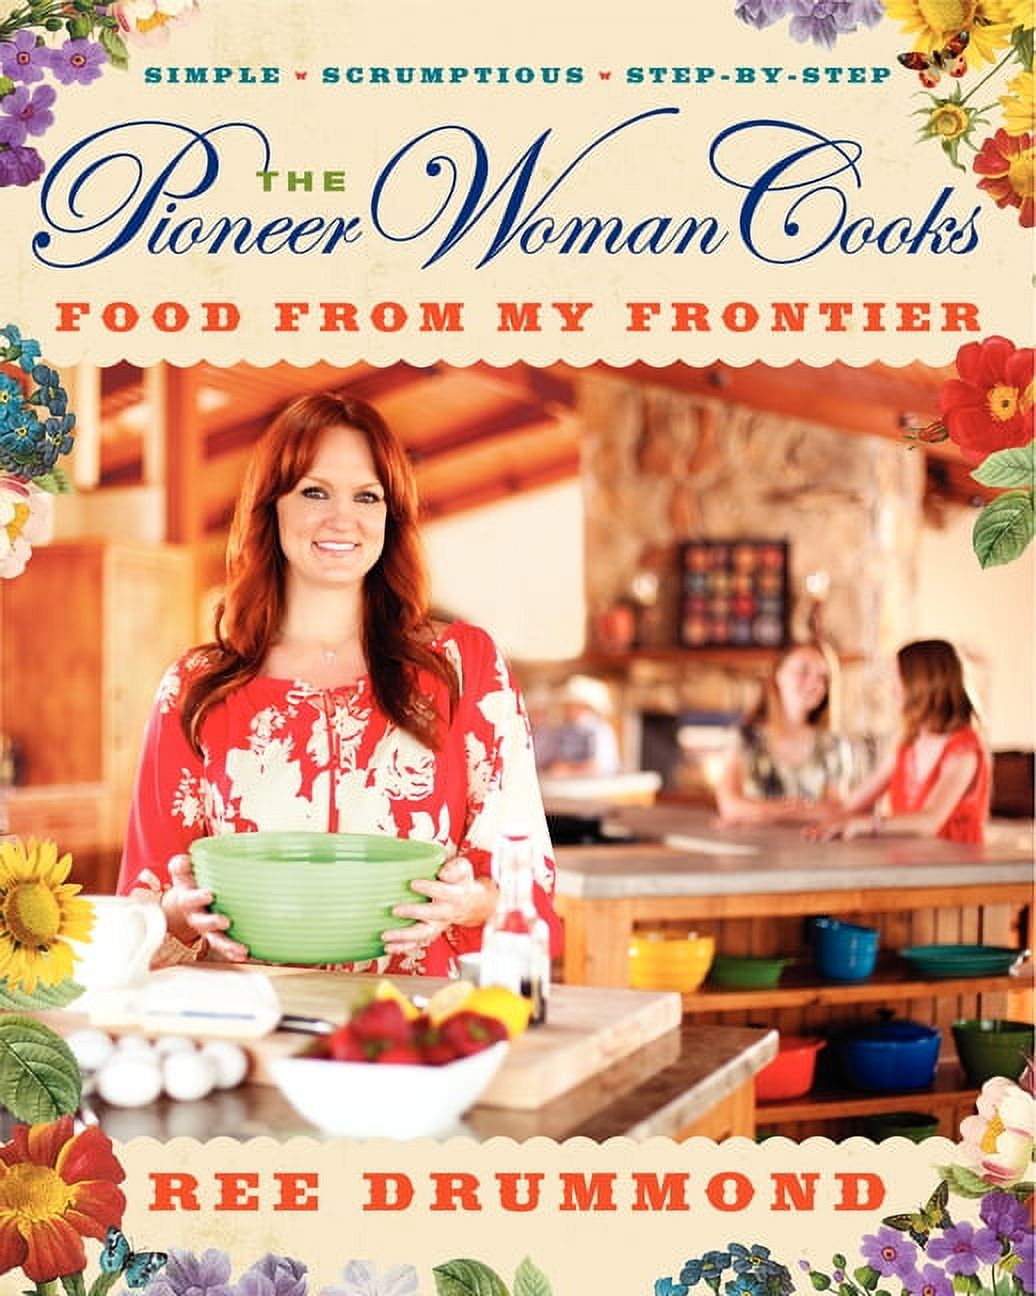 The Pioneer Woman Cooks--Food from My Frontier (Hardcover) - image 1 of 2